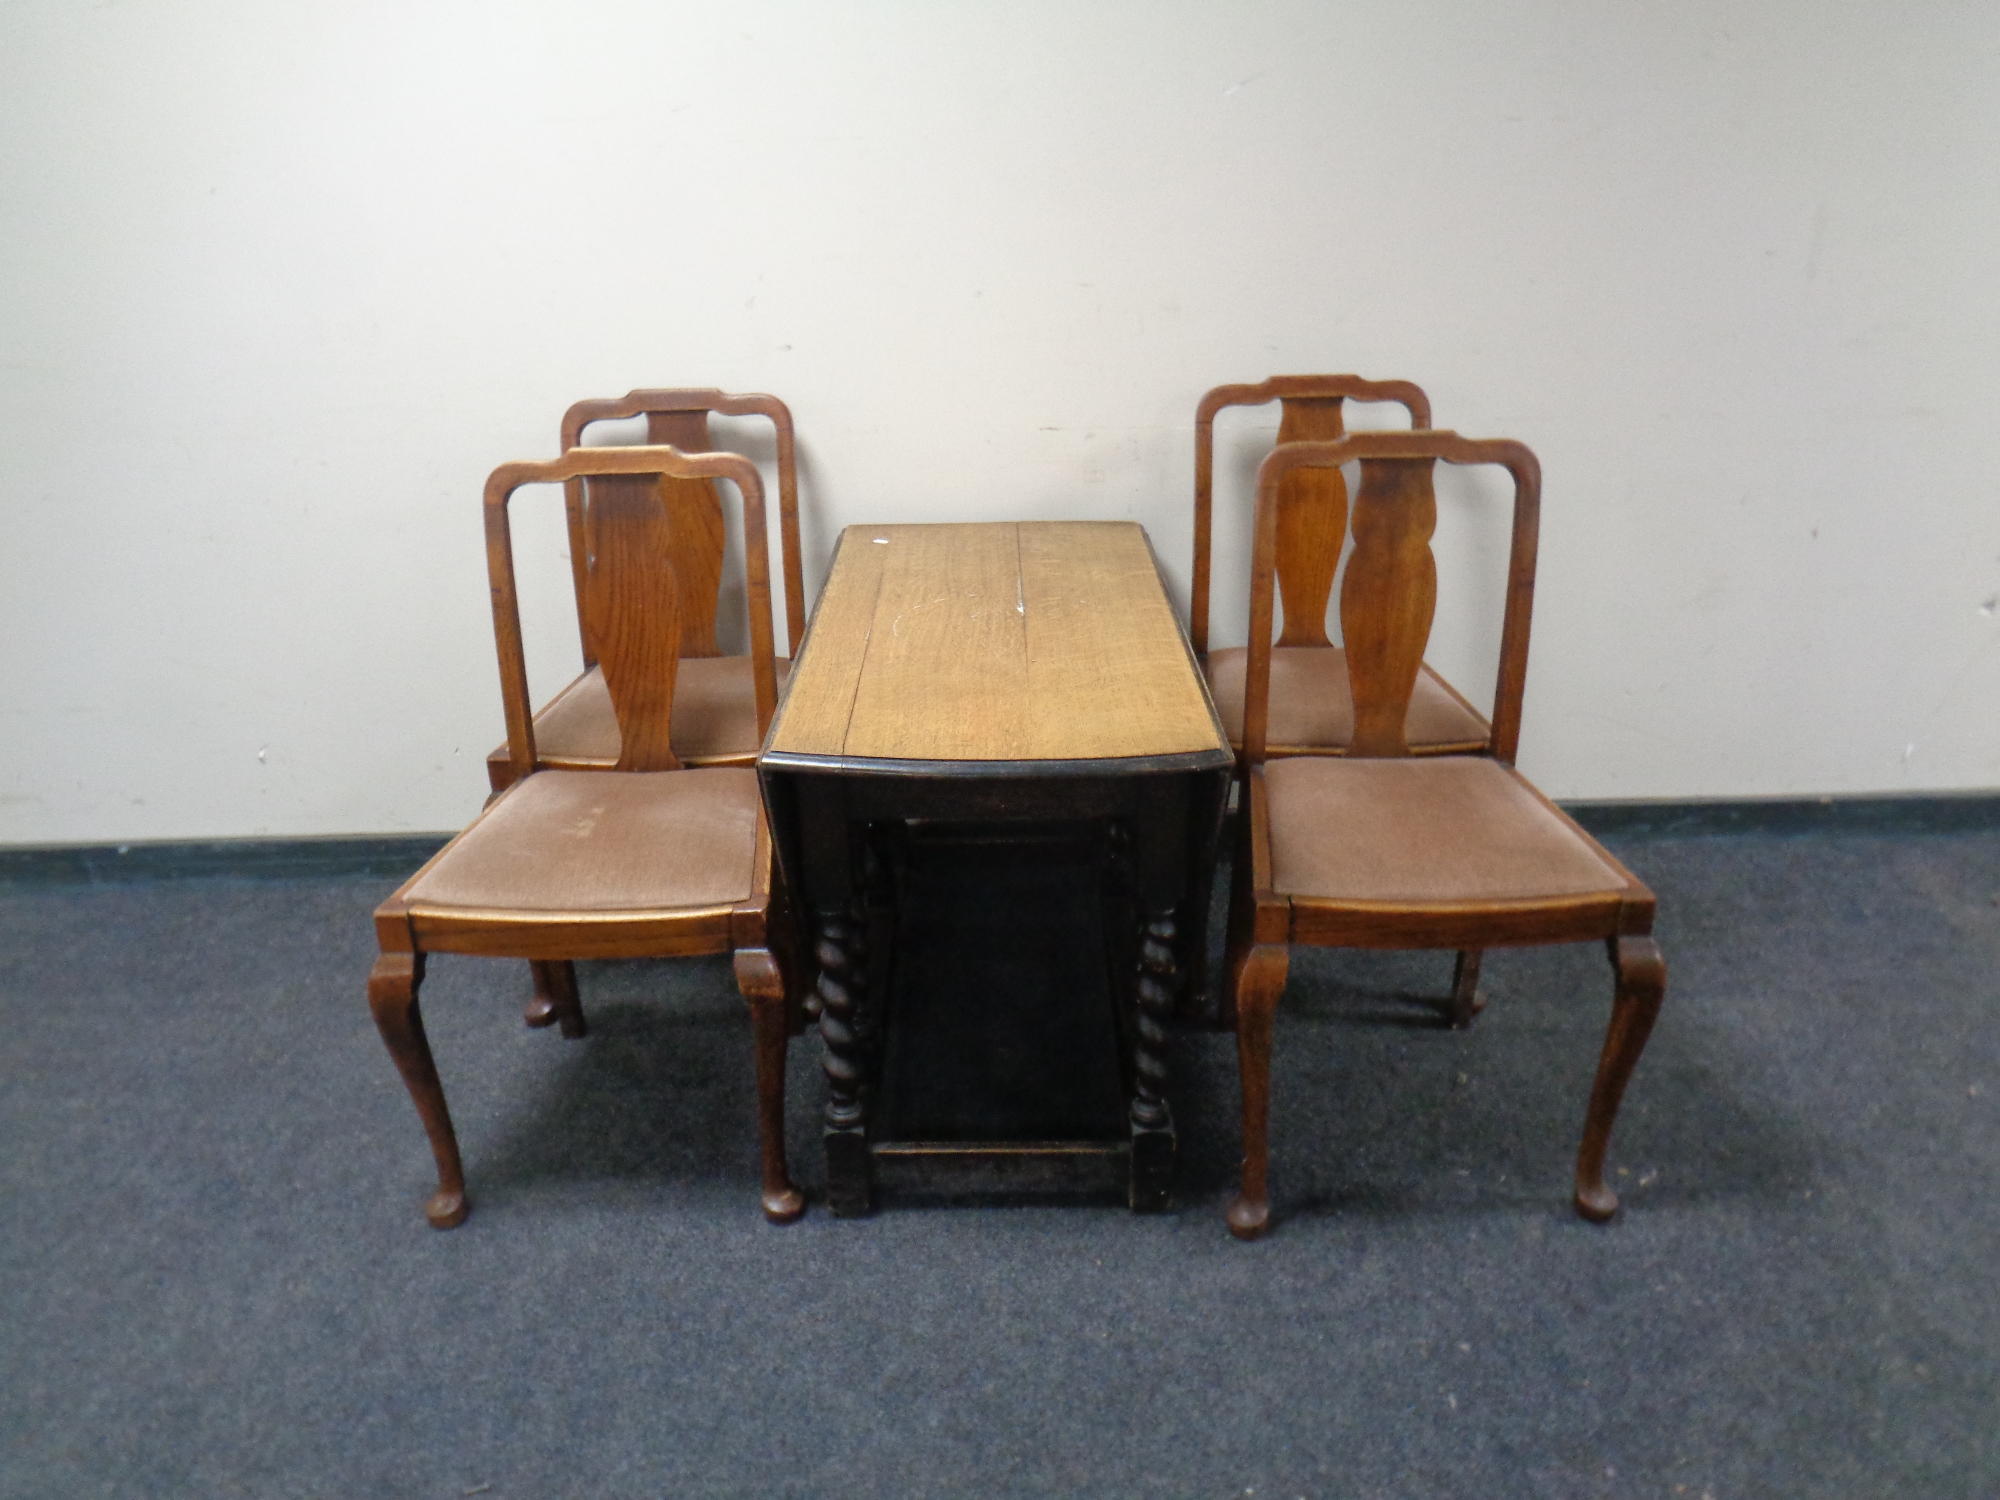 An oak gateleg table and four chairs.